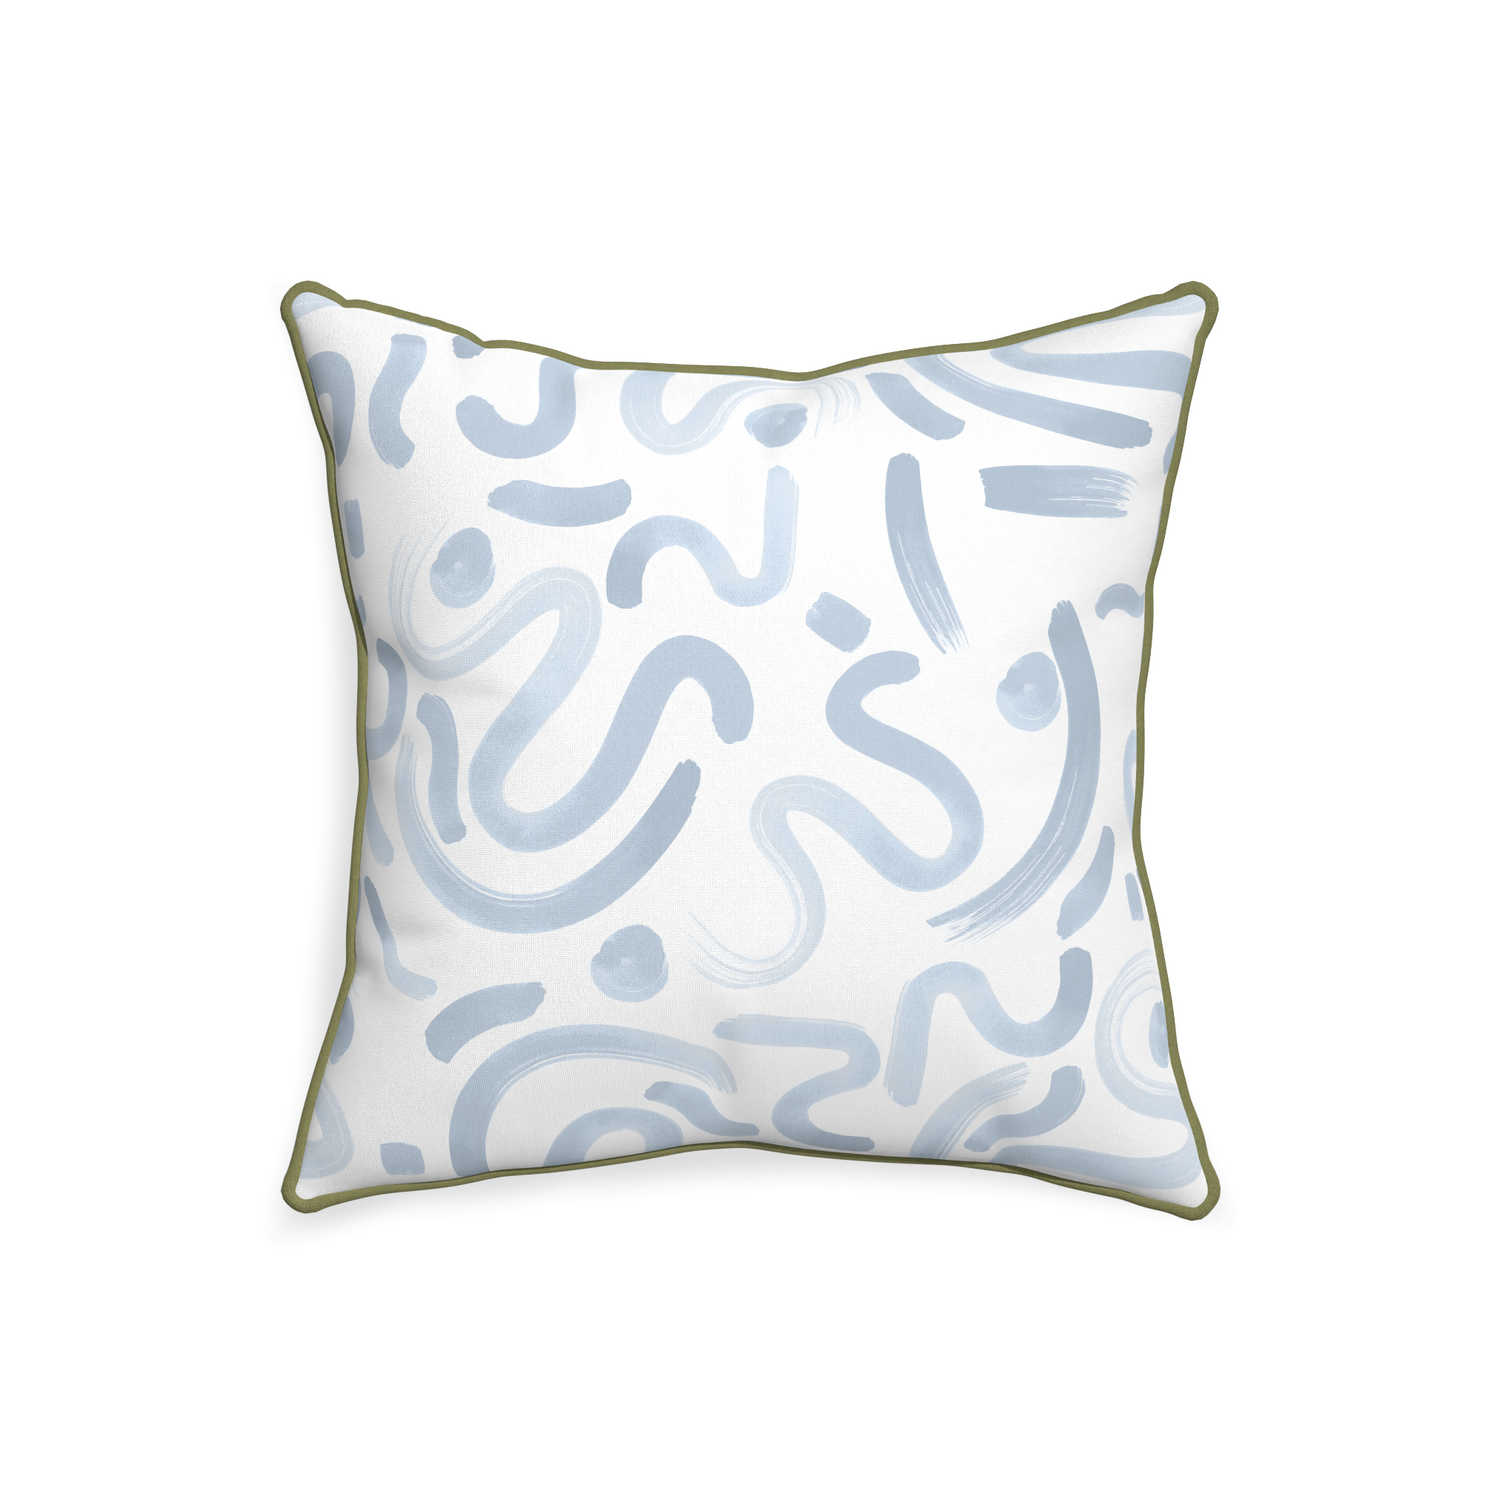 20-square hockney sky custom pillow with moss piping on white background